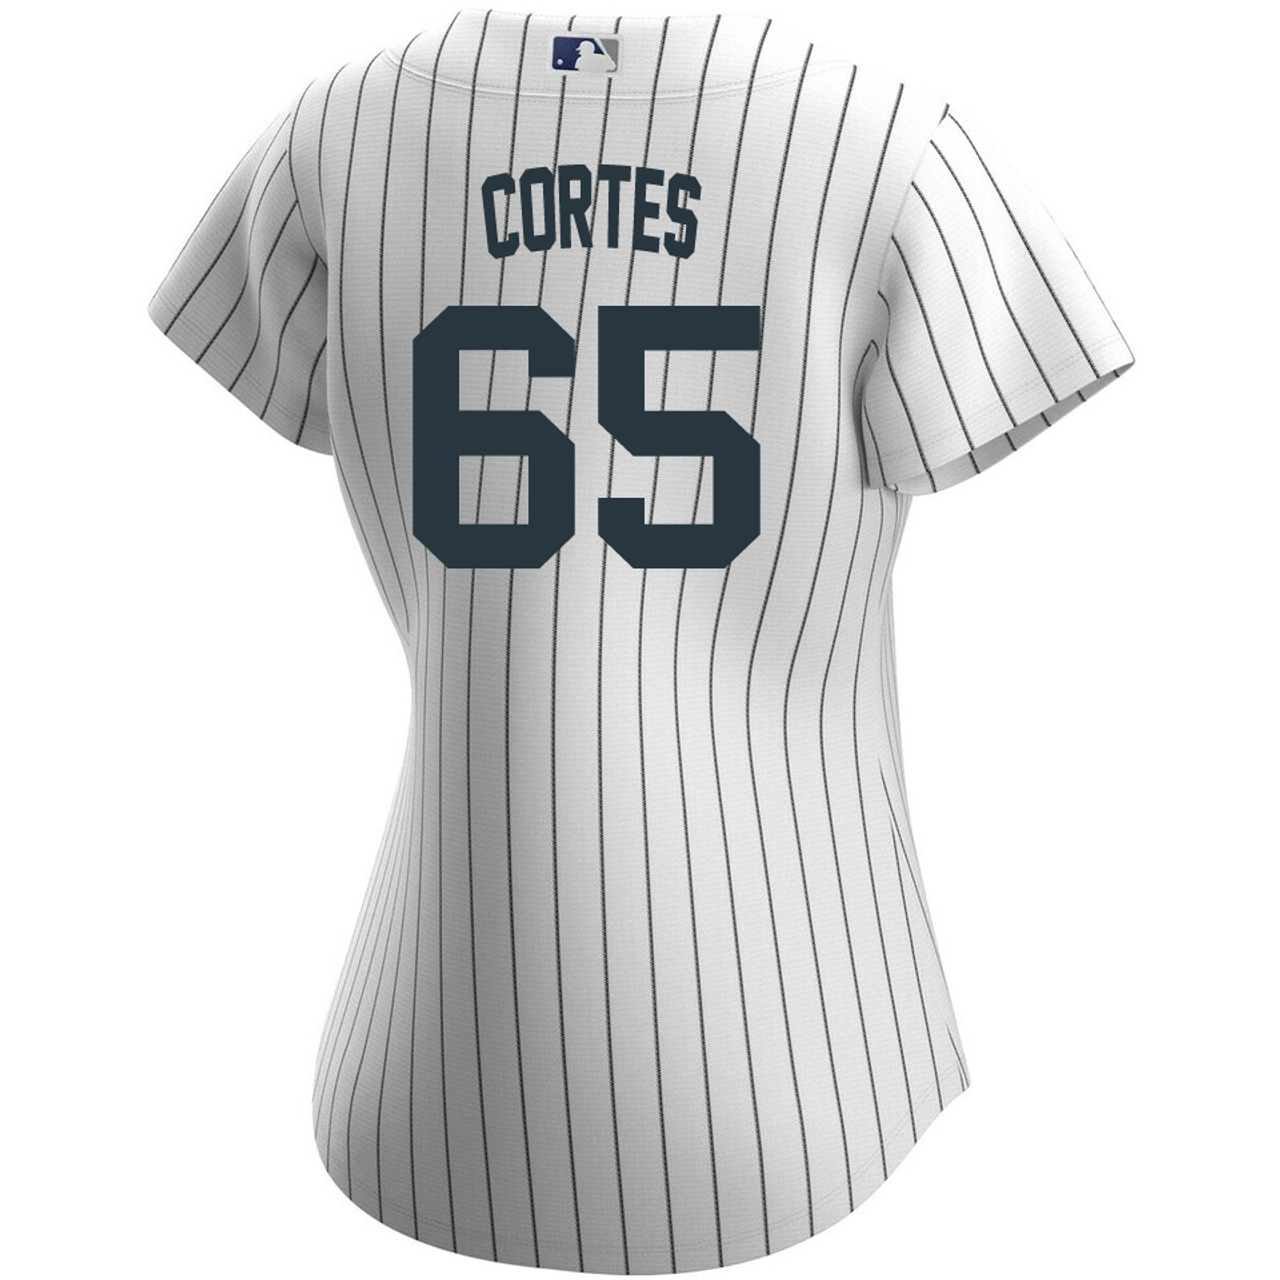 Nestor Cortes Ladies Jersey - NY Yankees Replica Womens Home Jersey